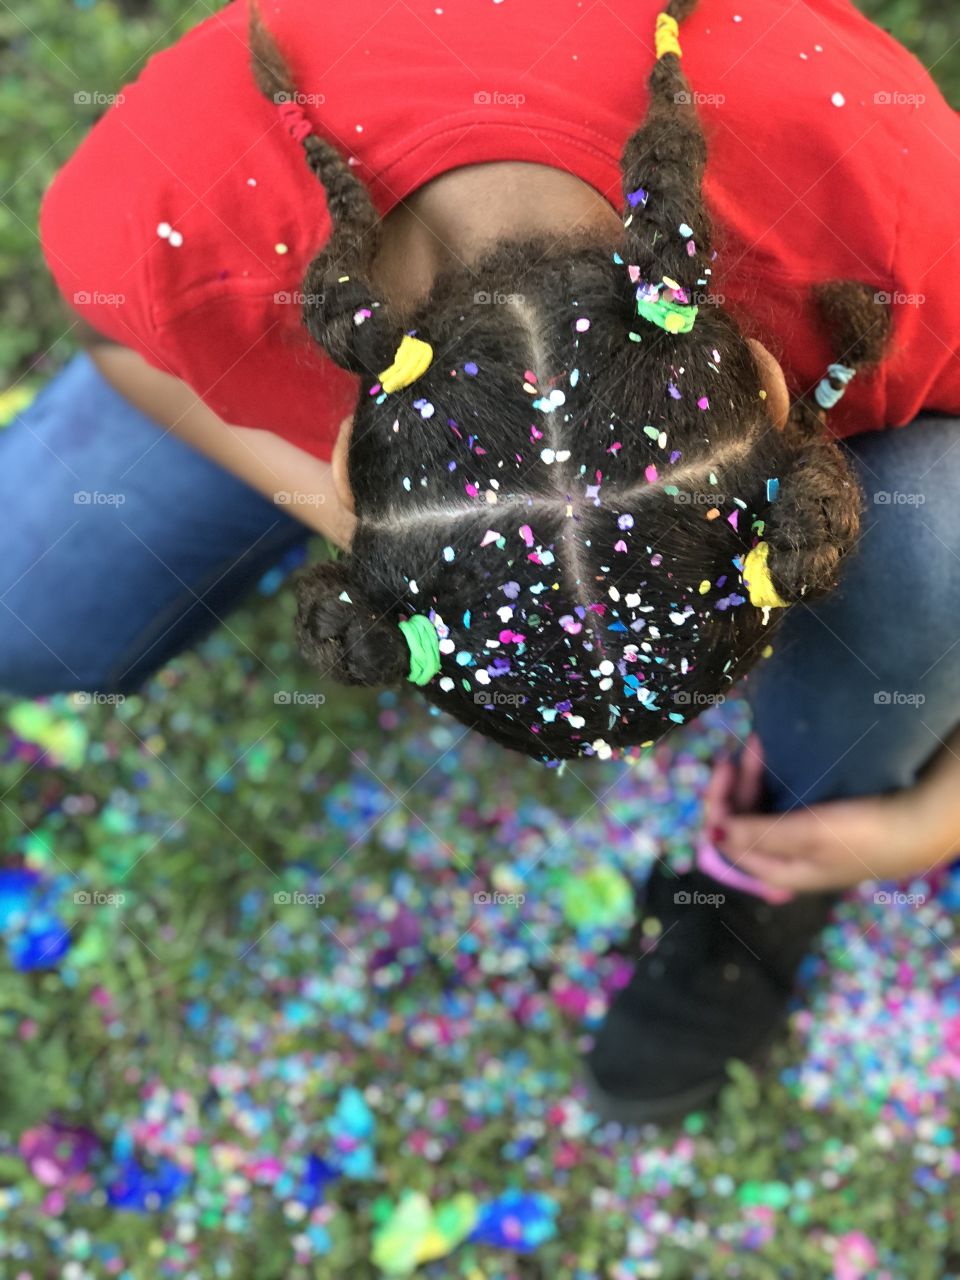 There are so many ways to celebrate in life. Cracking a confetti filled colorful egg shell on someone's head is just one of them. 